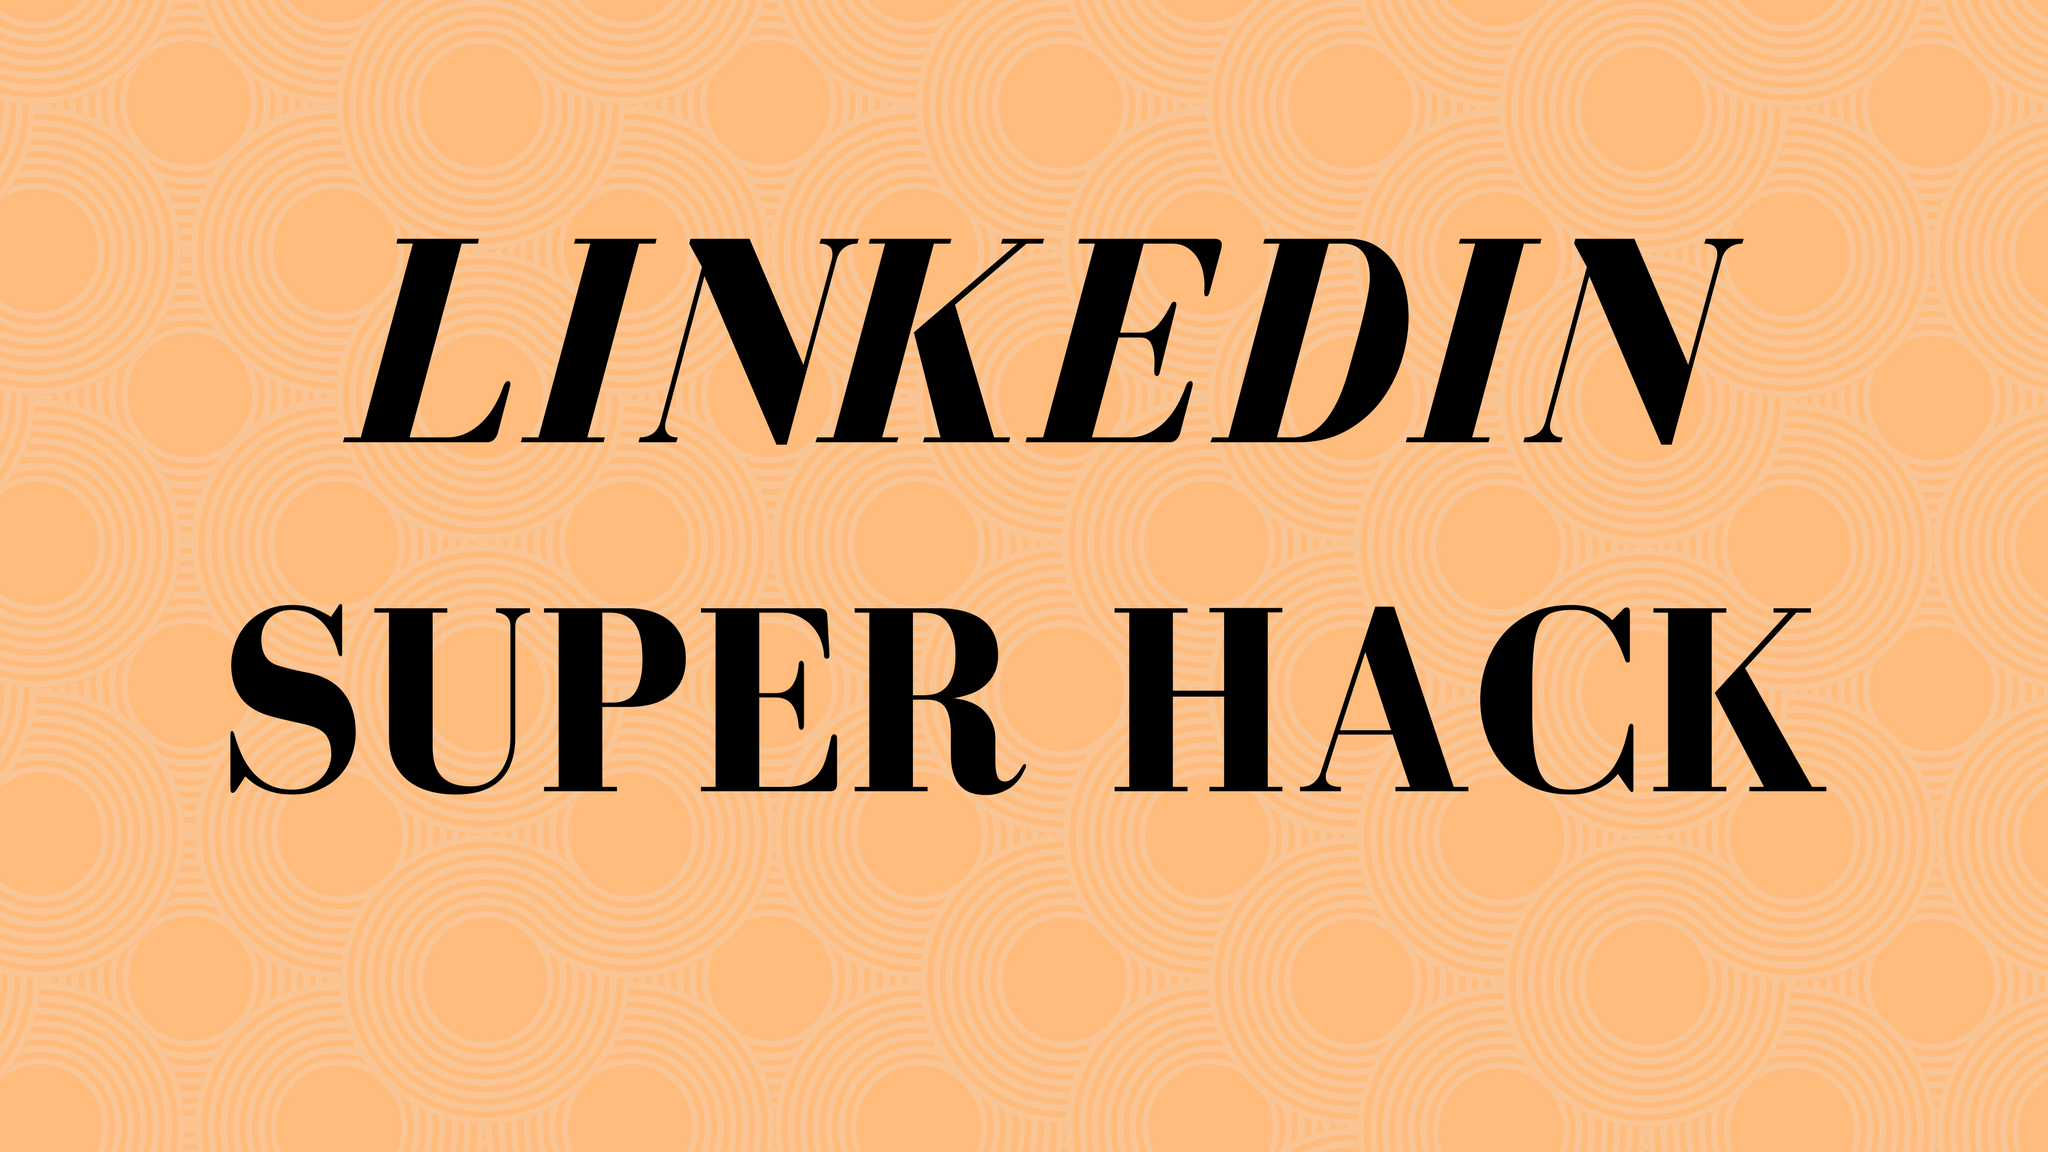 LinkedIn connection requests tool hack